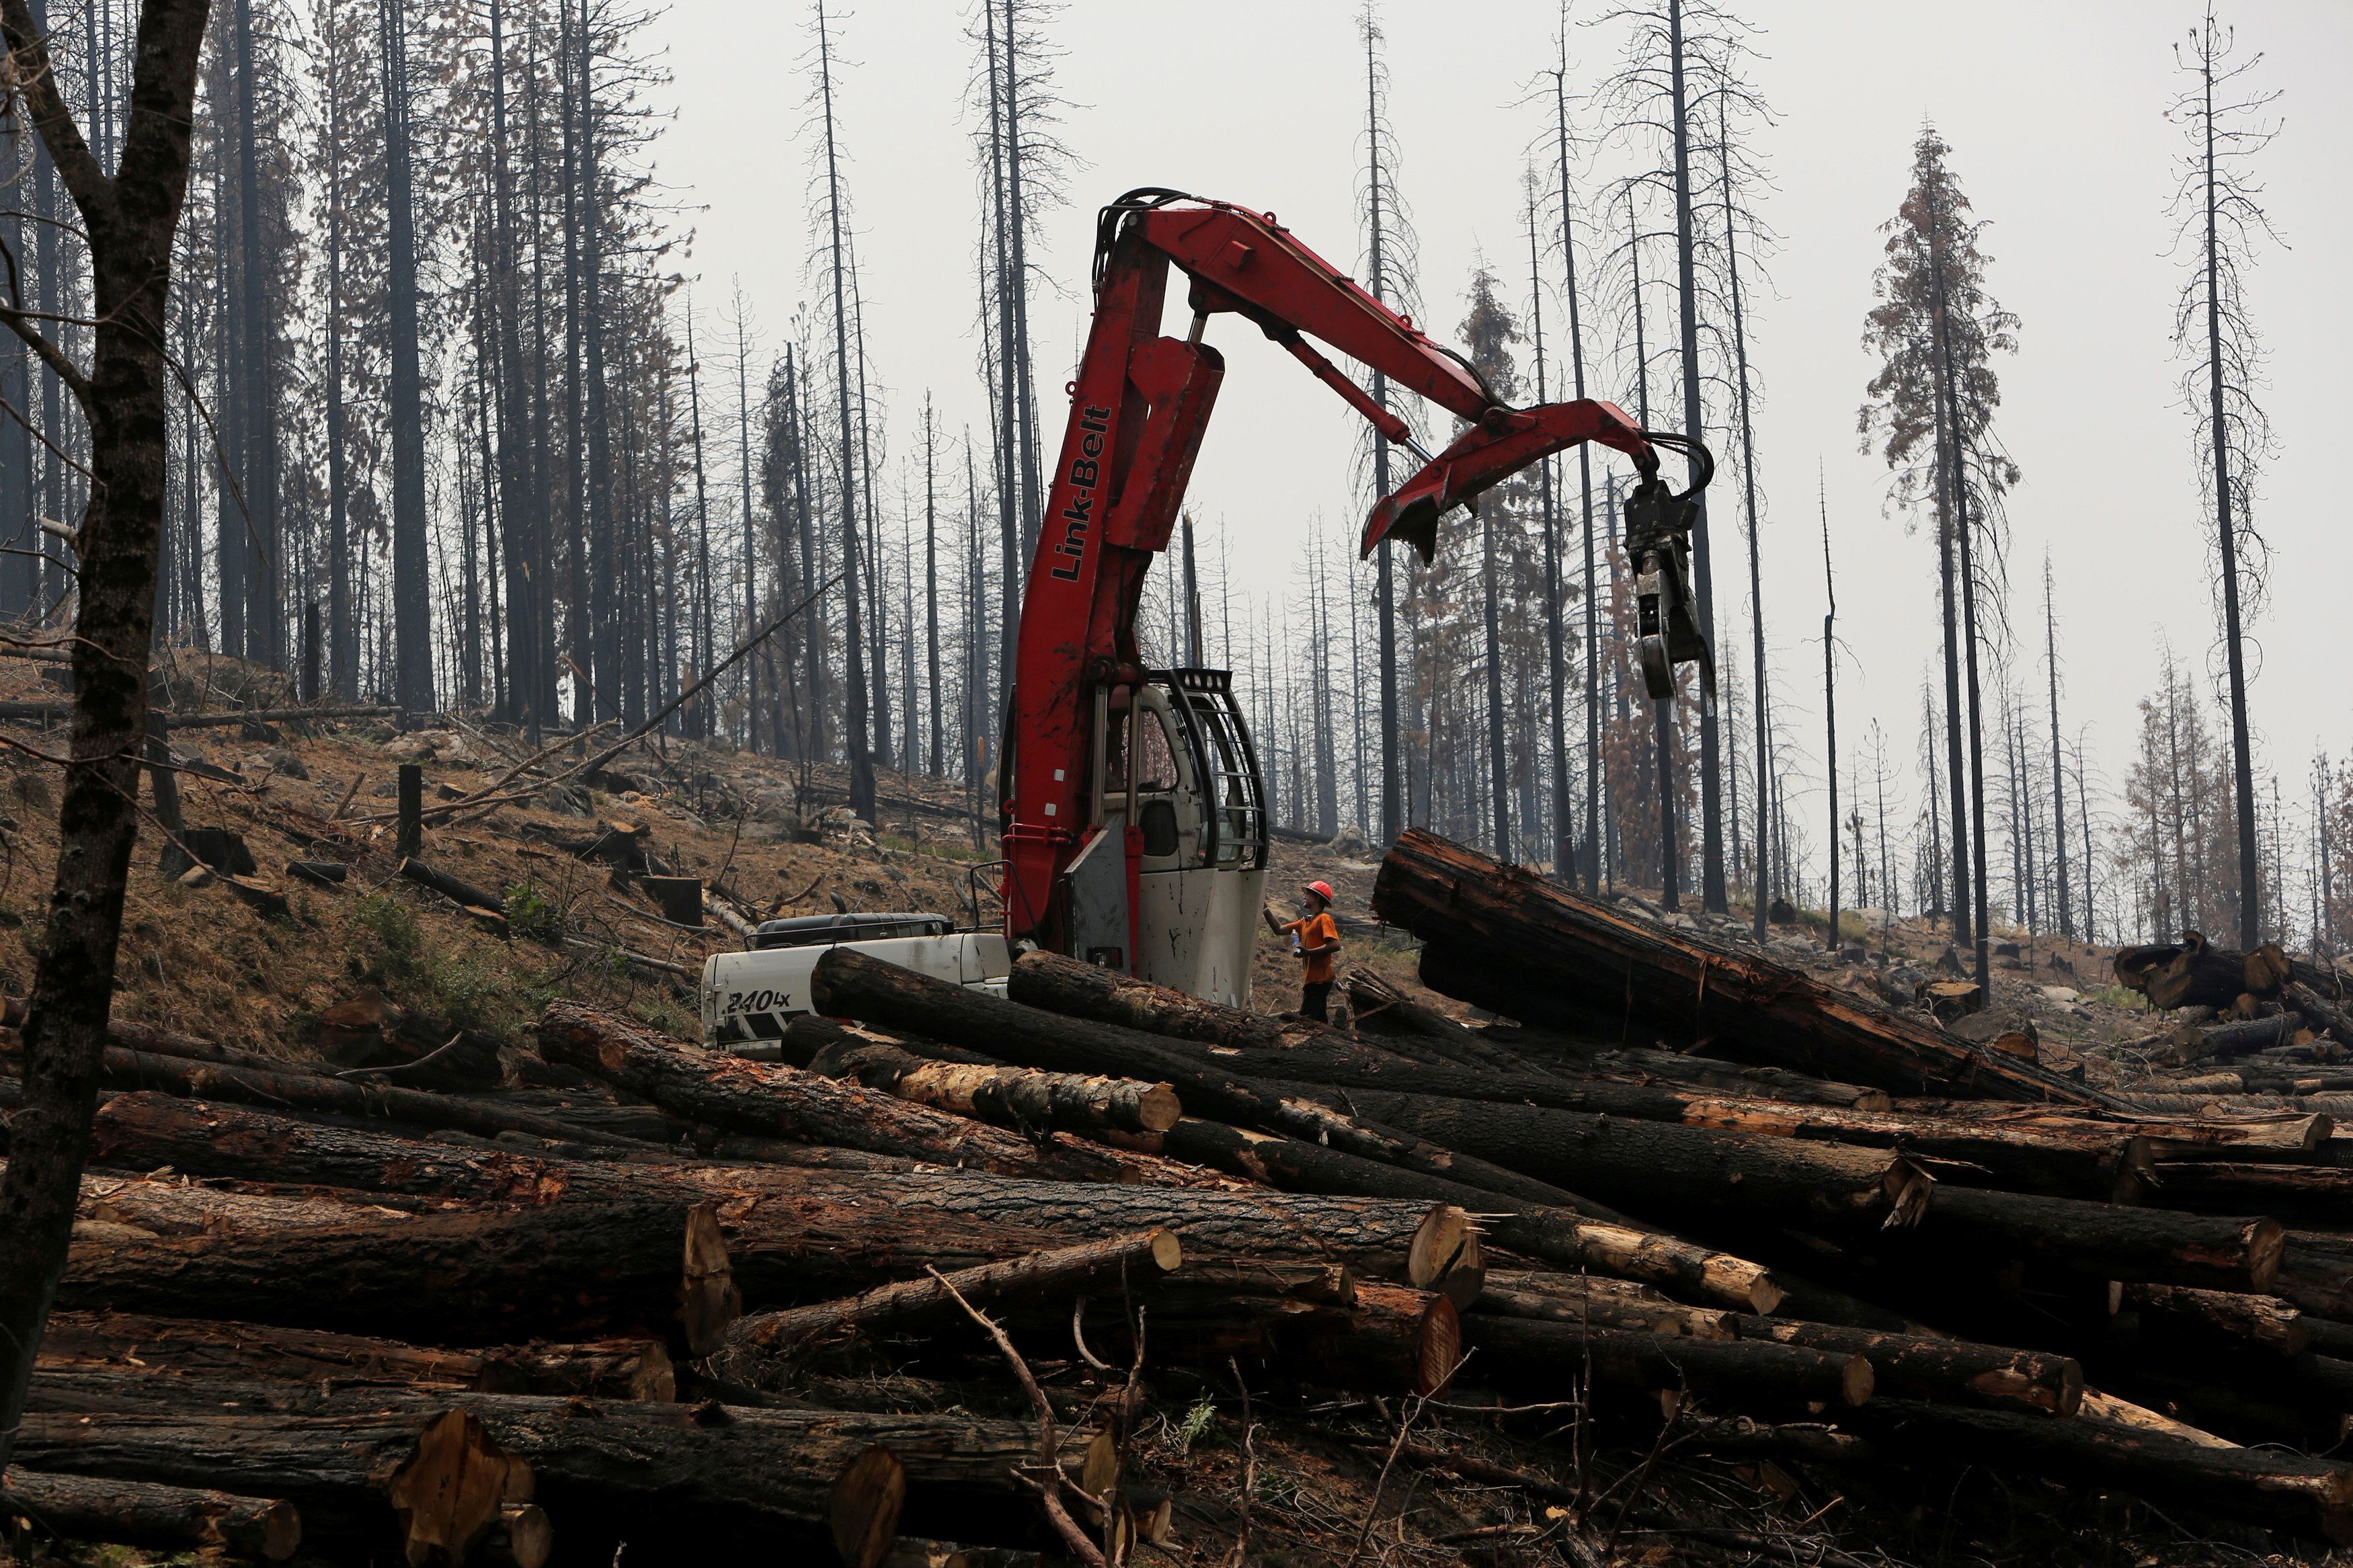 An active logging site is pictured among burned trees from Rim fire near Groveland